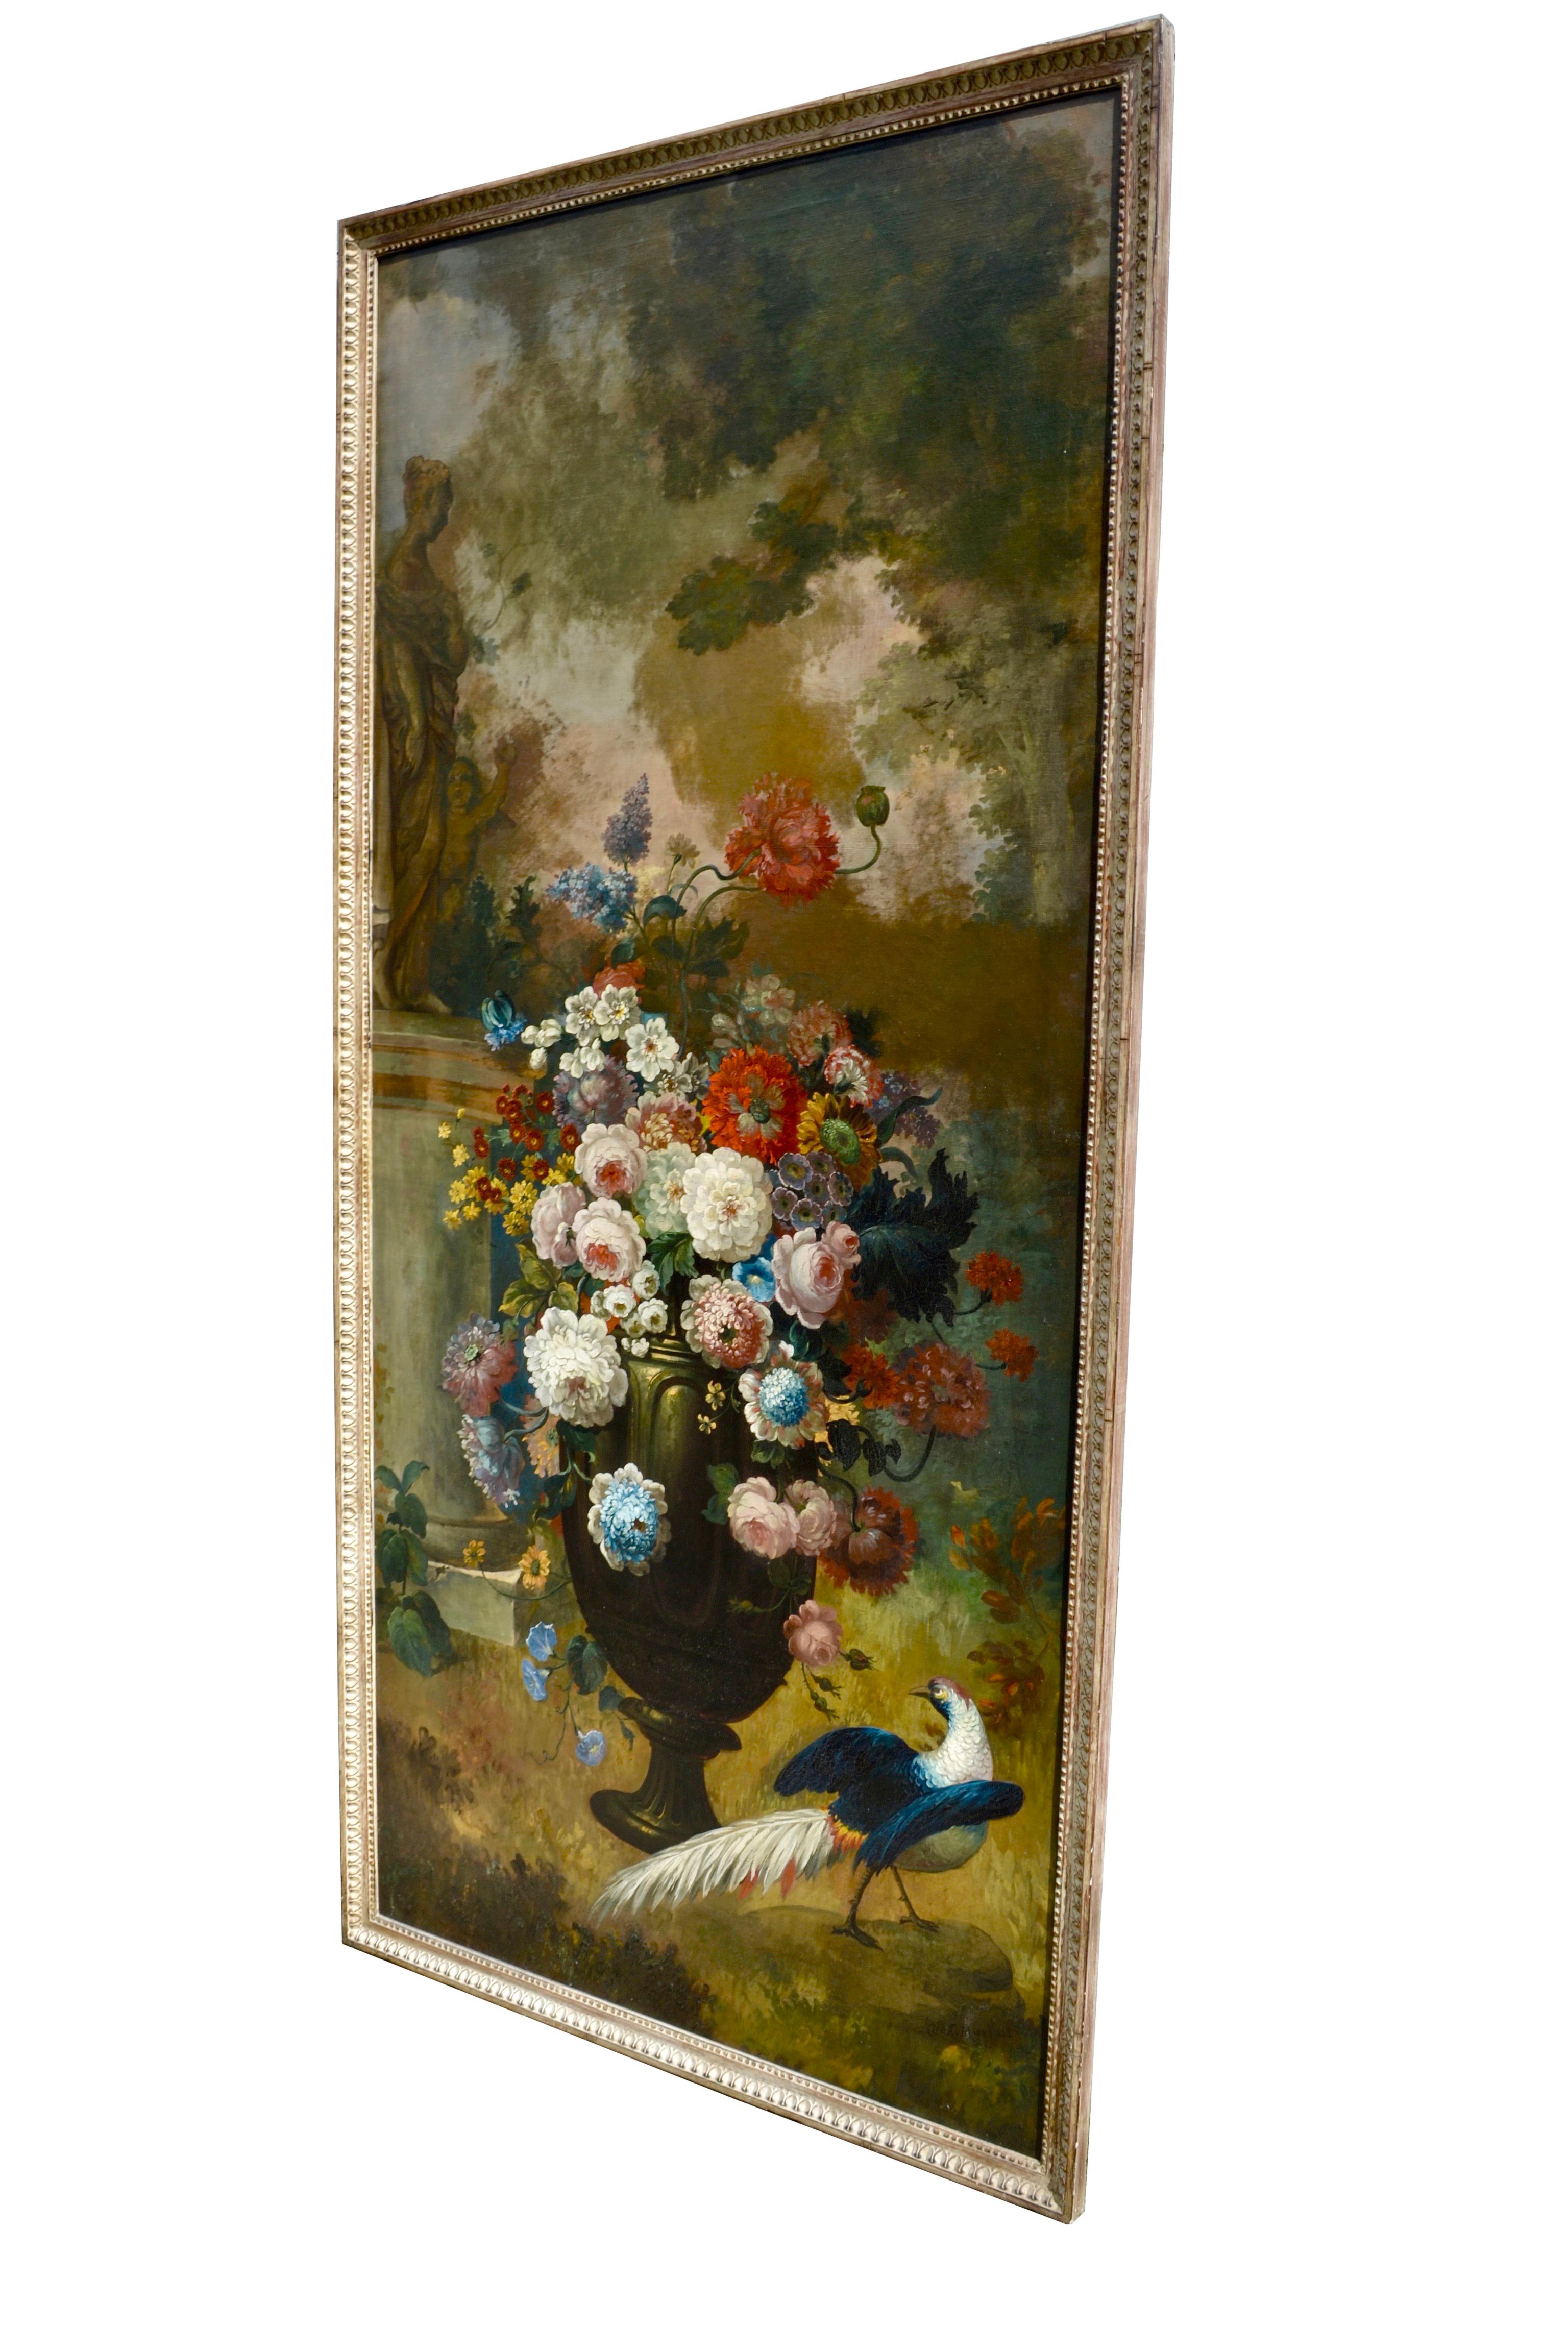 Romantic Large Signed Floral Still Life Painting with a Peacock